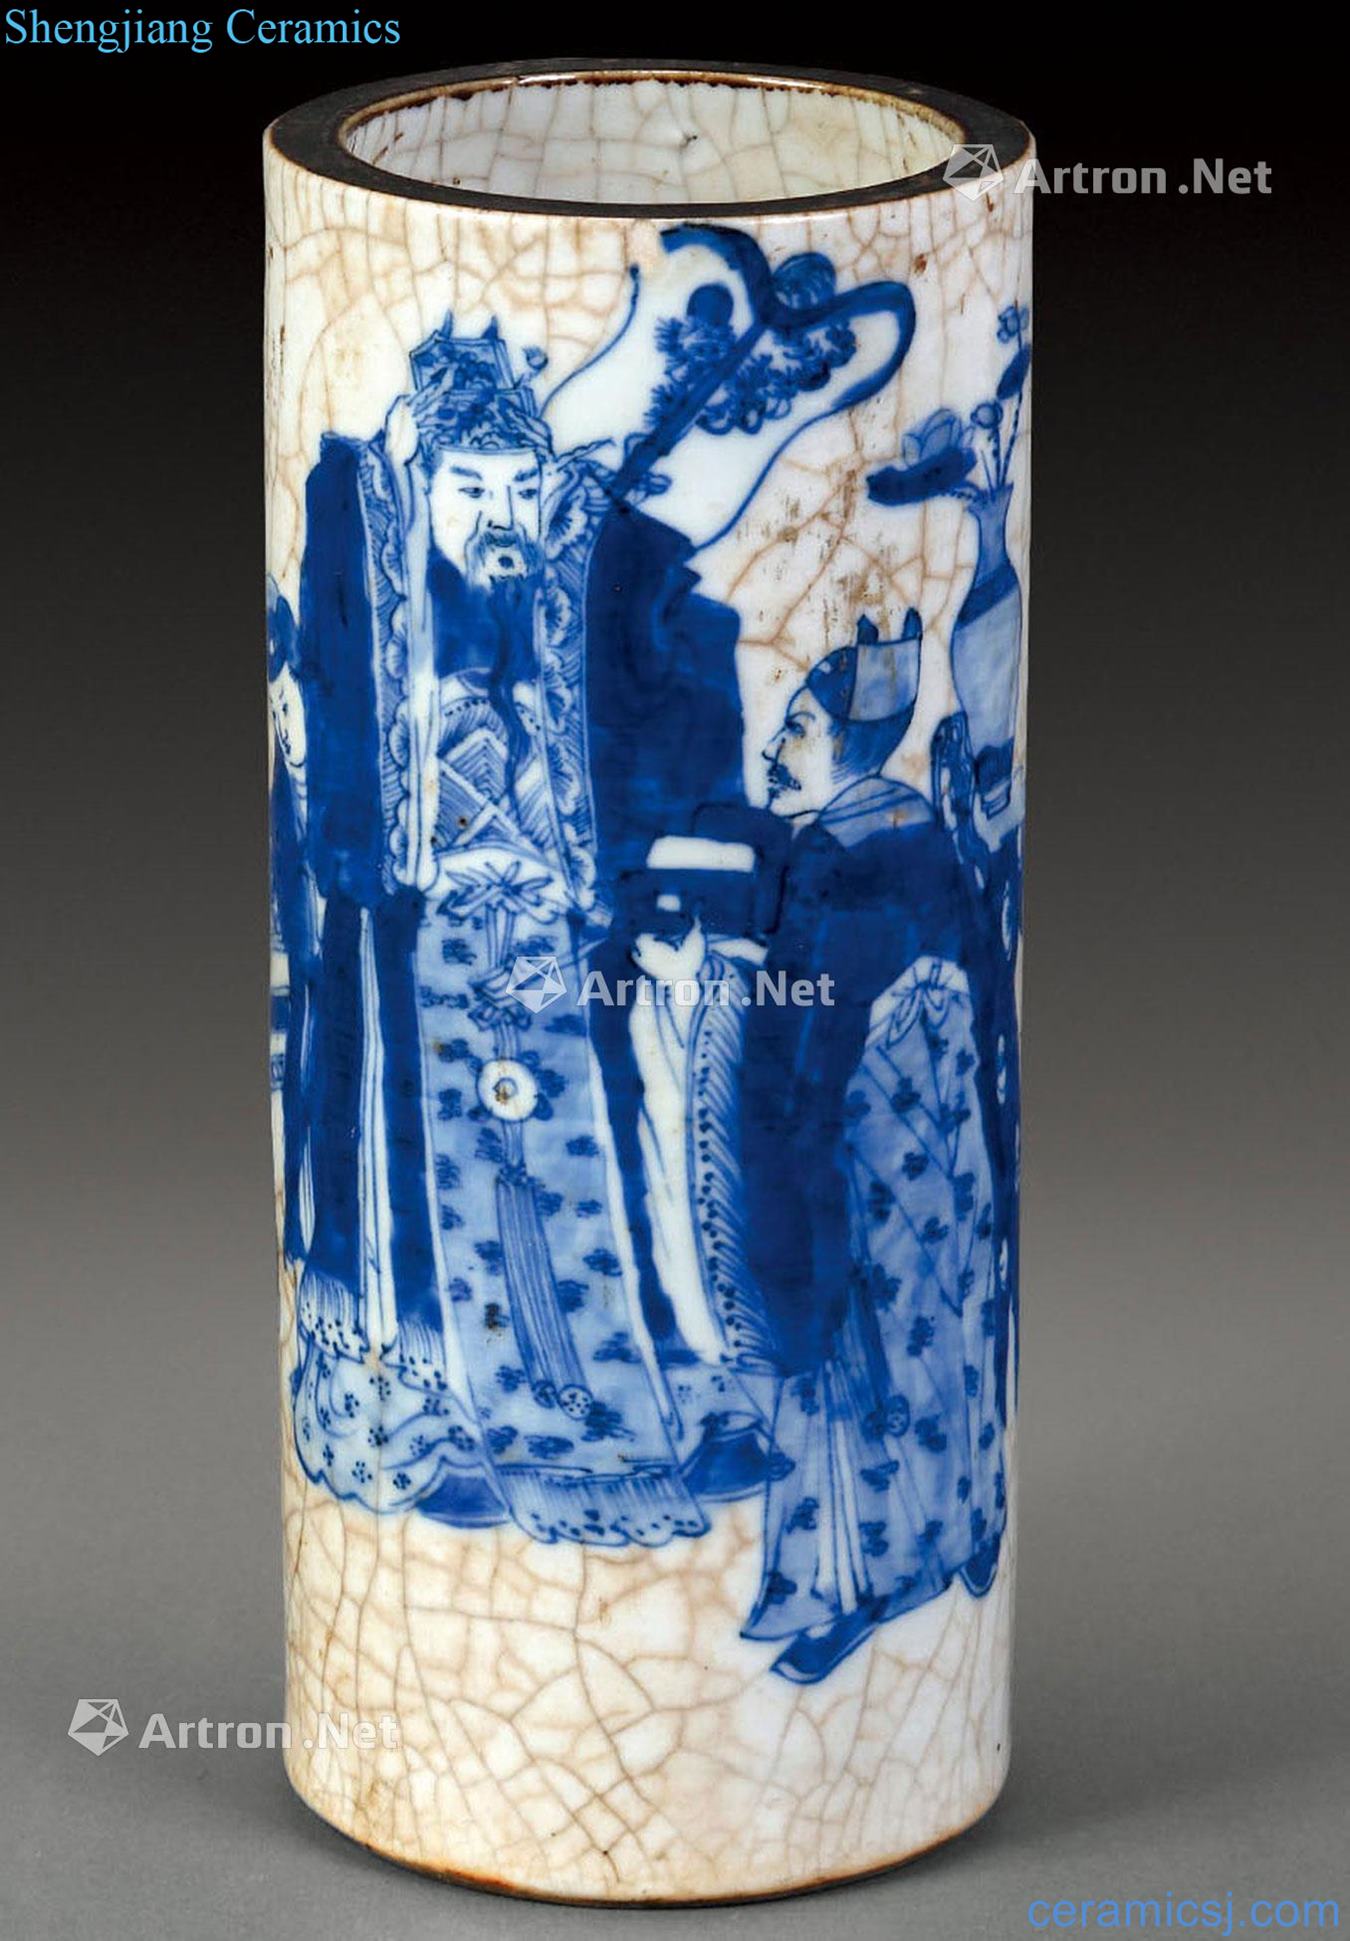 The elder brother of the qing dynasty porcelain character cap tube